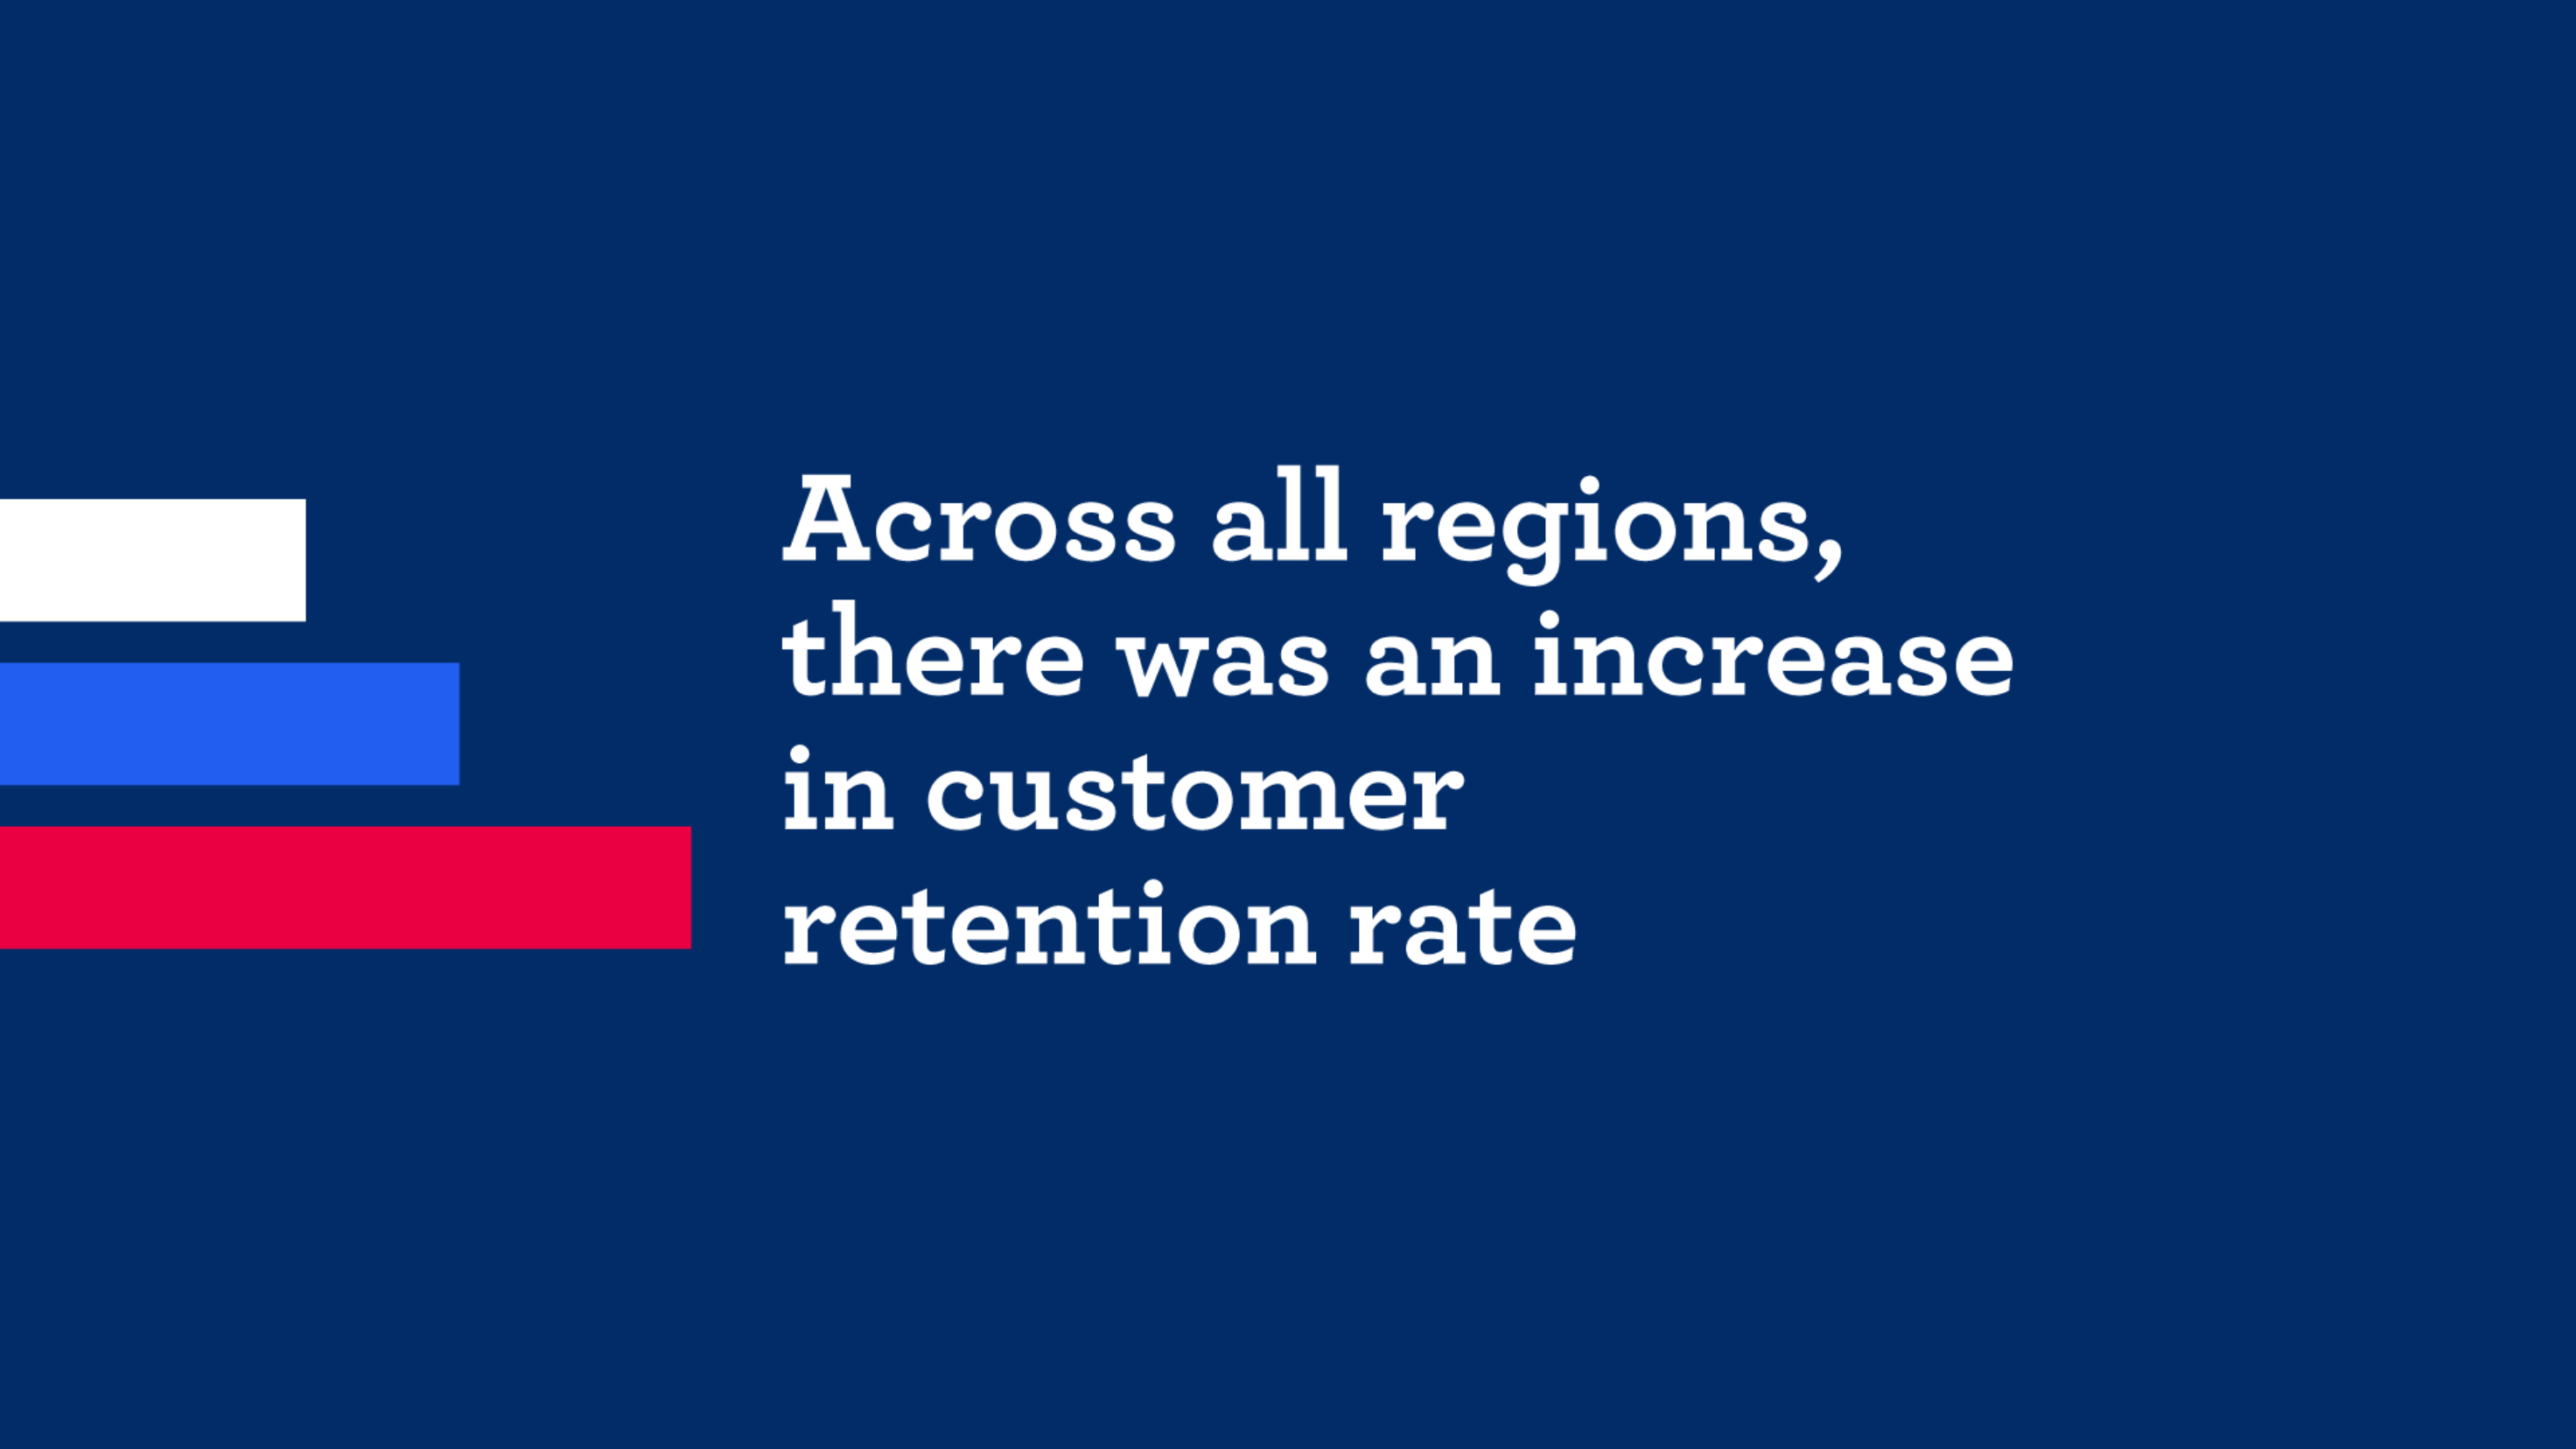 Across all regions, there was an increase in customer retention rate.